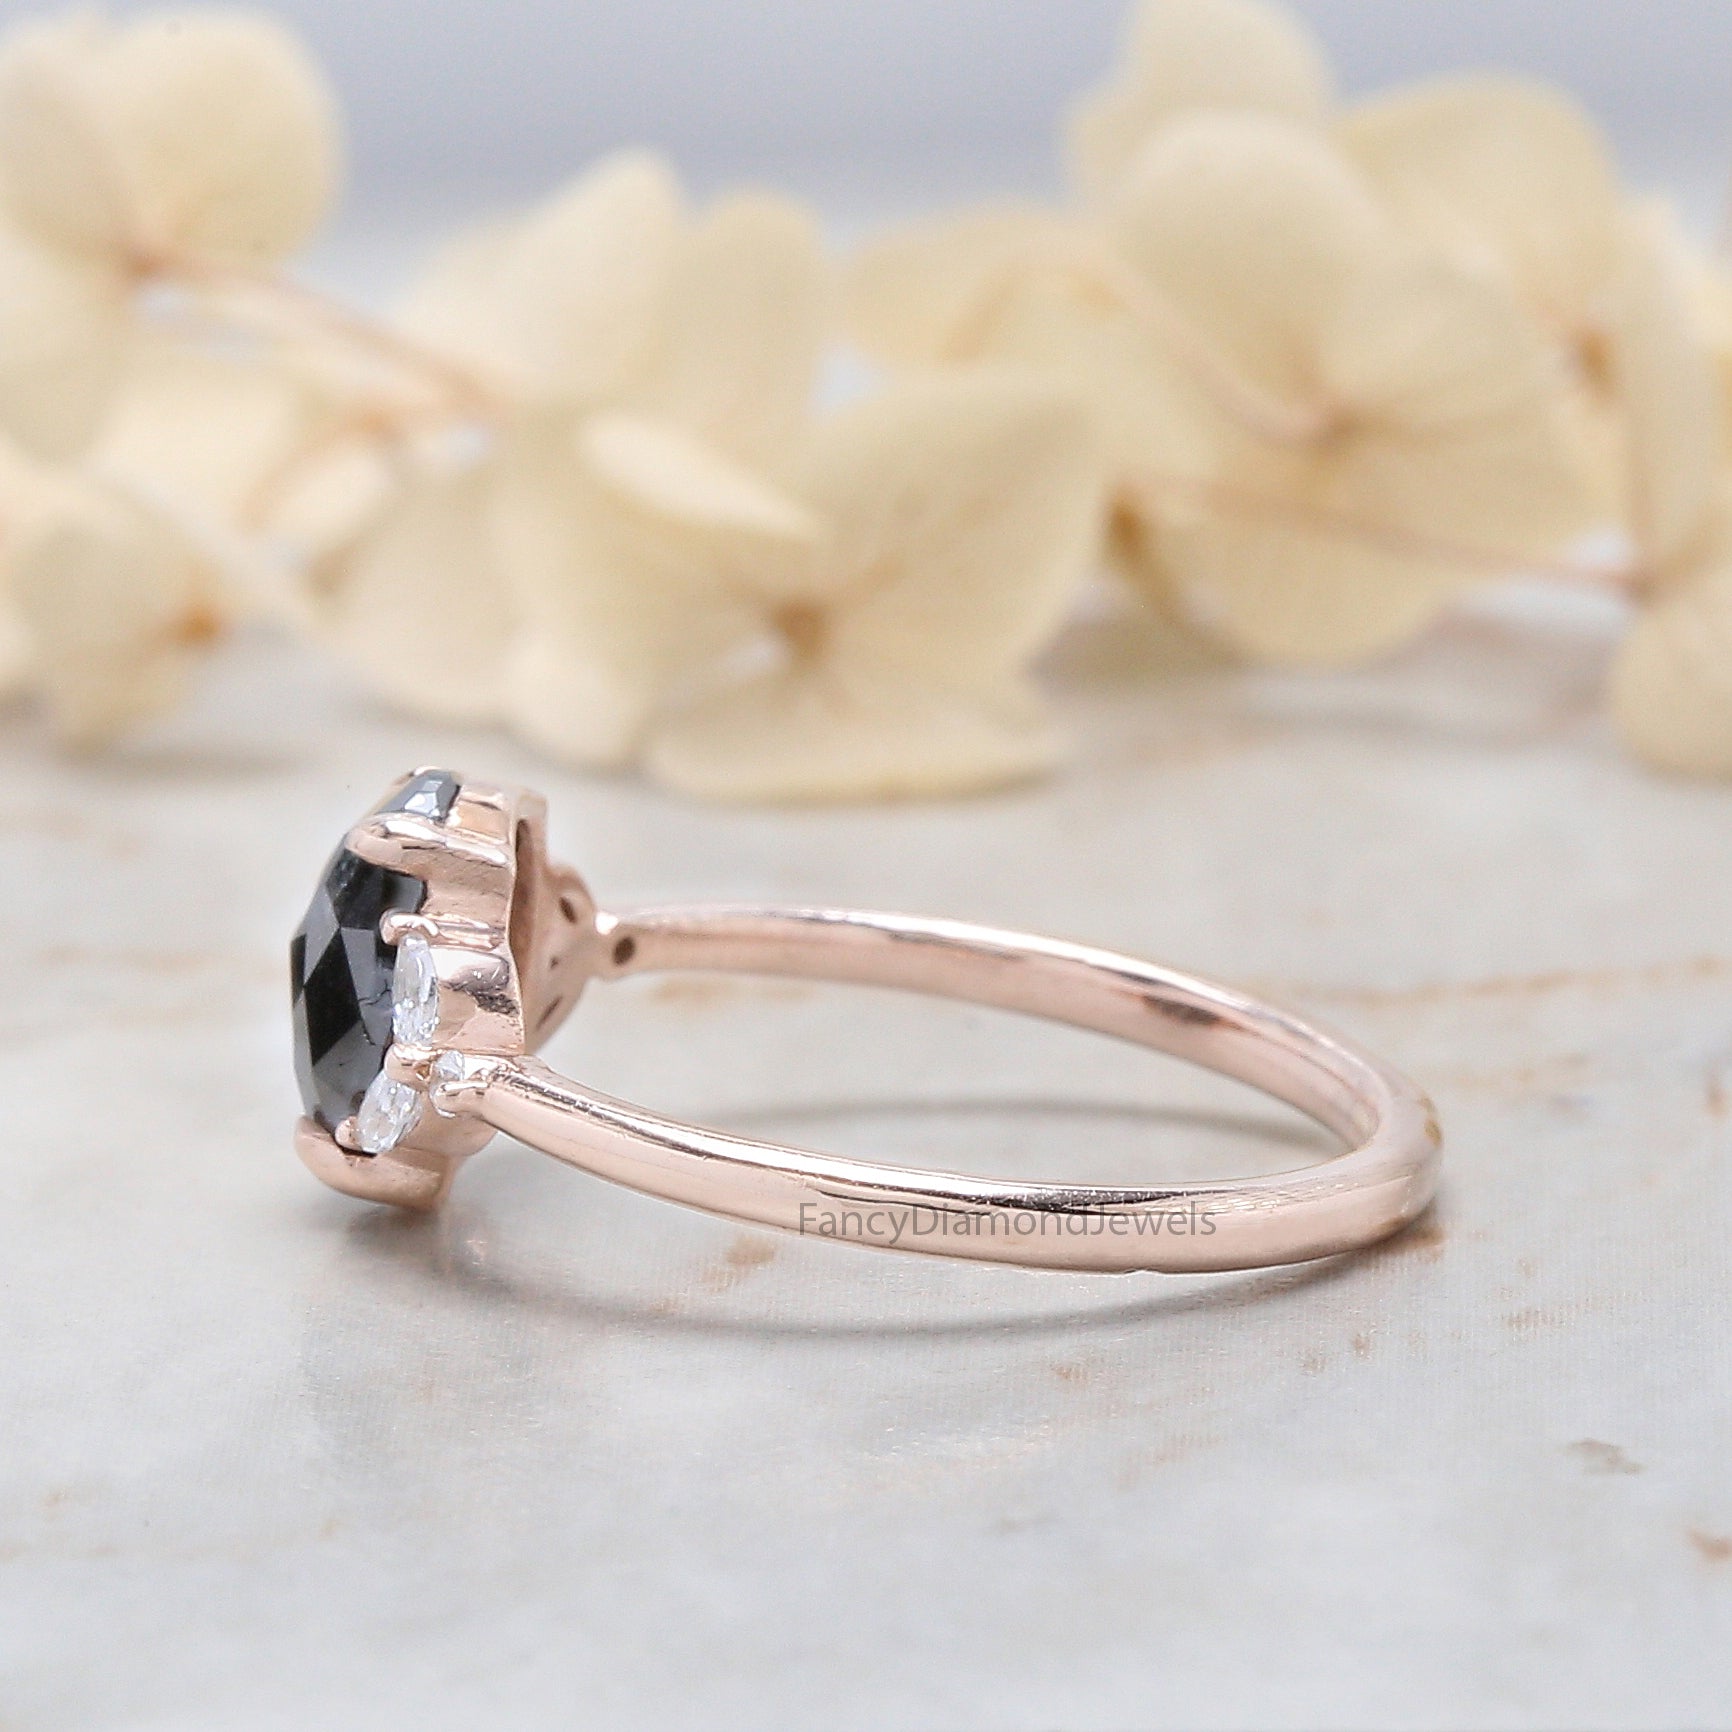 Oval Cut Salt And Pepper Diamond Ring 1.49 Ct 8.03 MM Oval Diamond Ring 14K Solid Rose Gold Silver Oval Engagement Ring Gift For Her QL2889